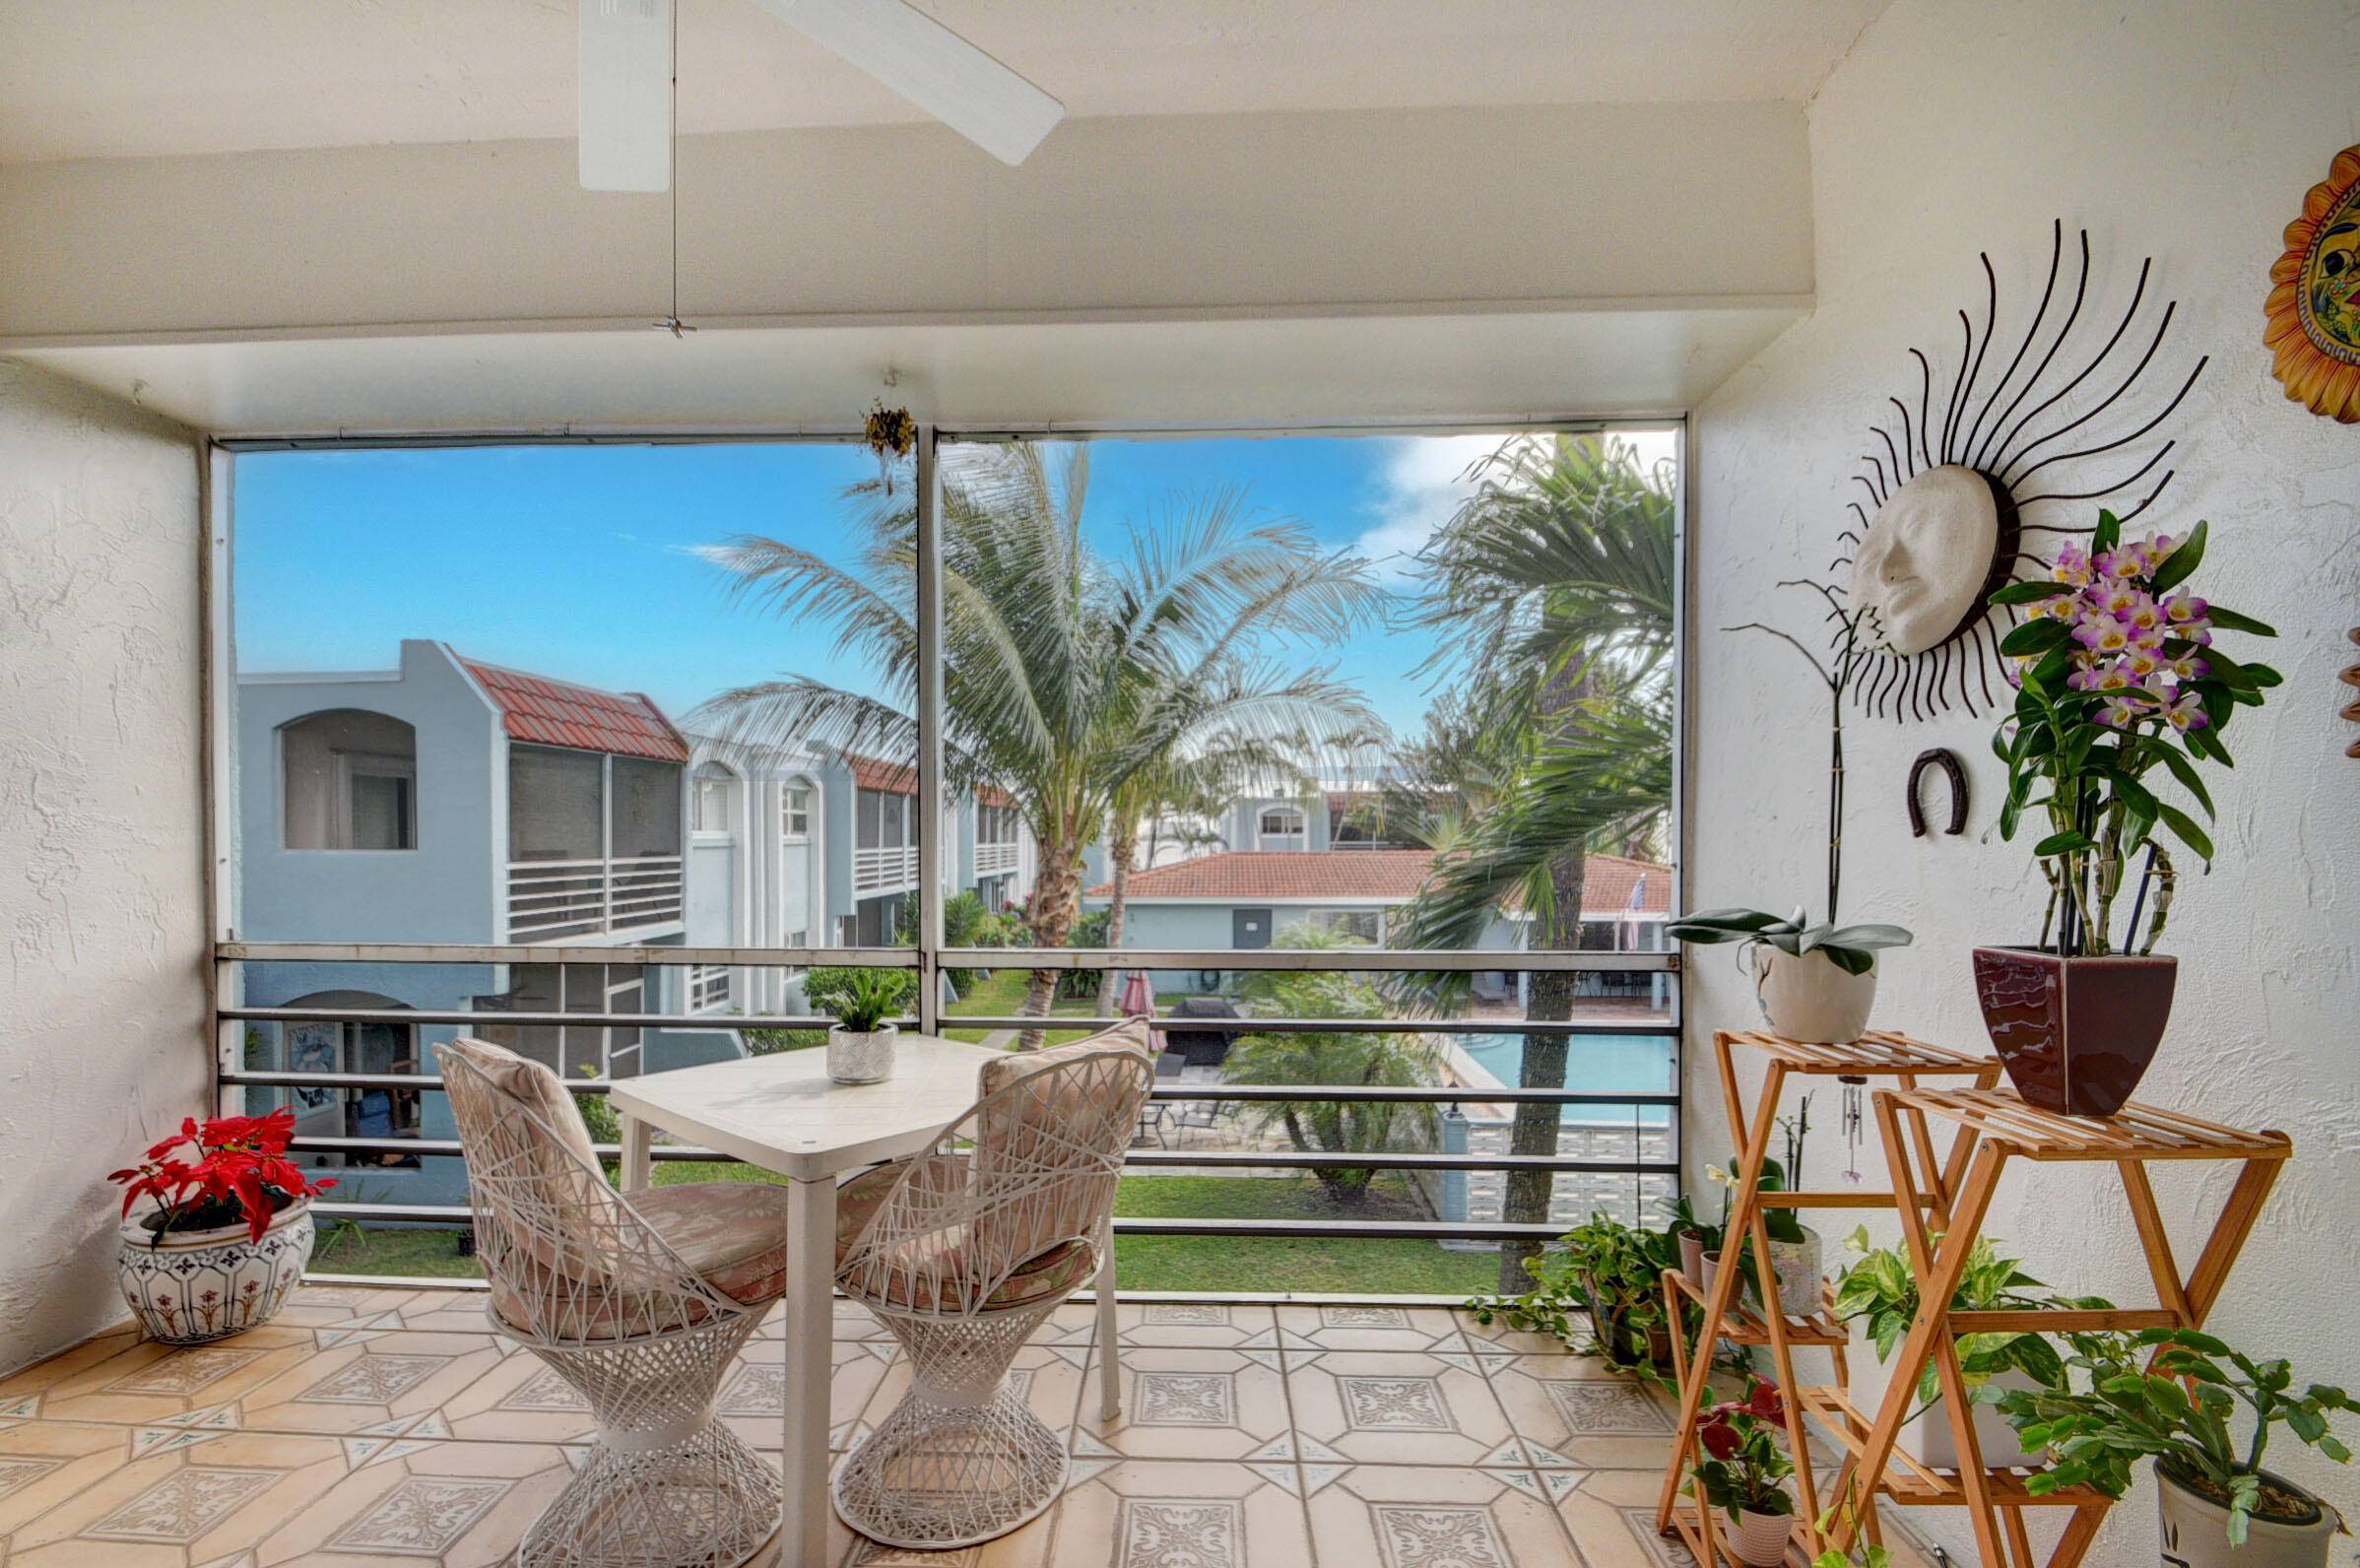 Welcome home to this 1 bedroom, 1 bathroom one of a kind Intracoastal apartment community.